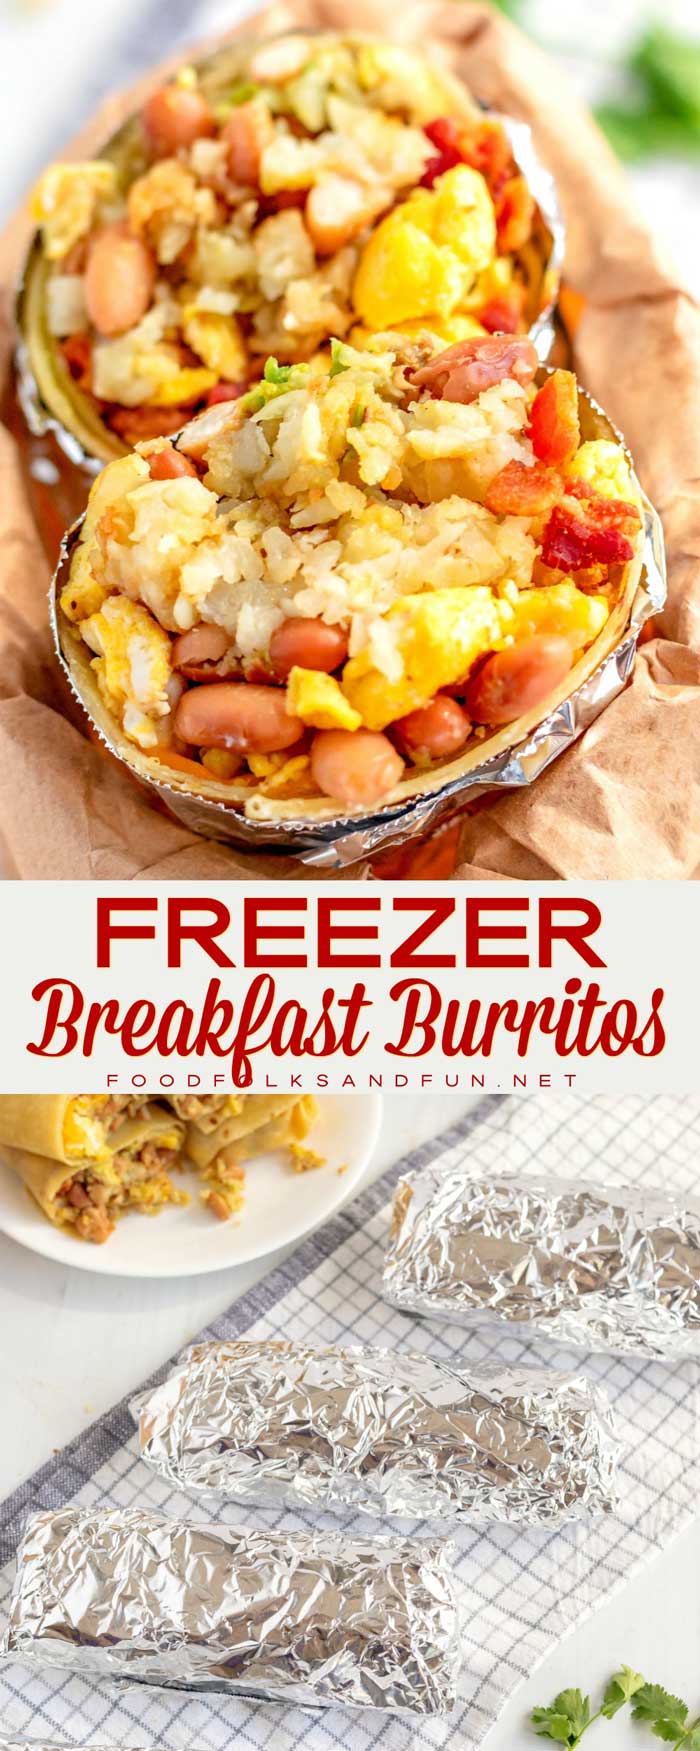 These freezer Breakfast Burritos are massive and stuffed with eggs, cheese, bacon, crispy potatoes, guacamole, and my secret ingredient that makes them incredible! via @foodfolksandfun